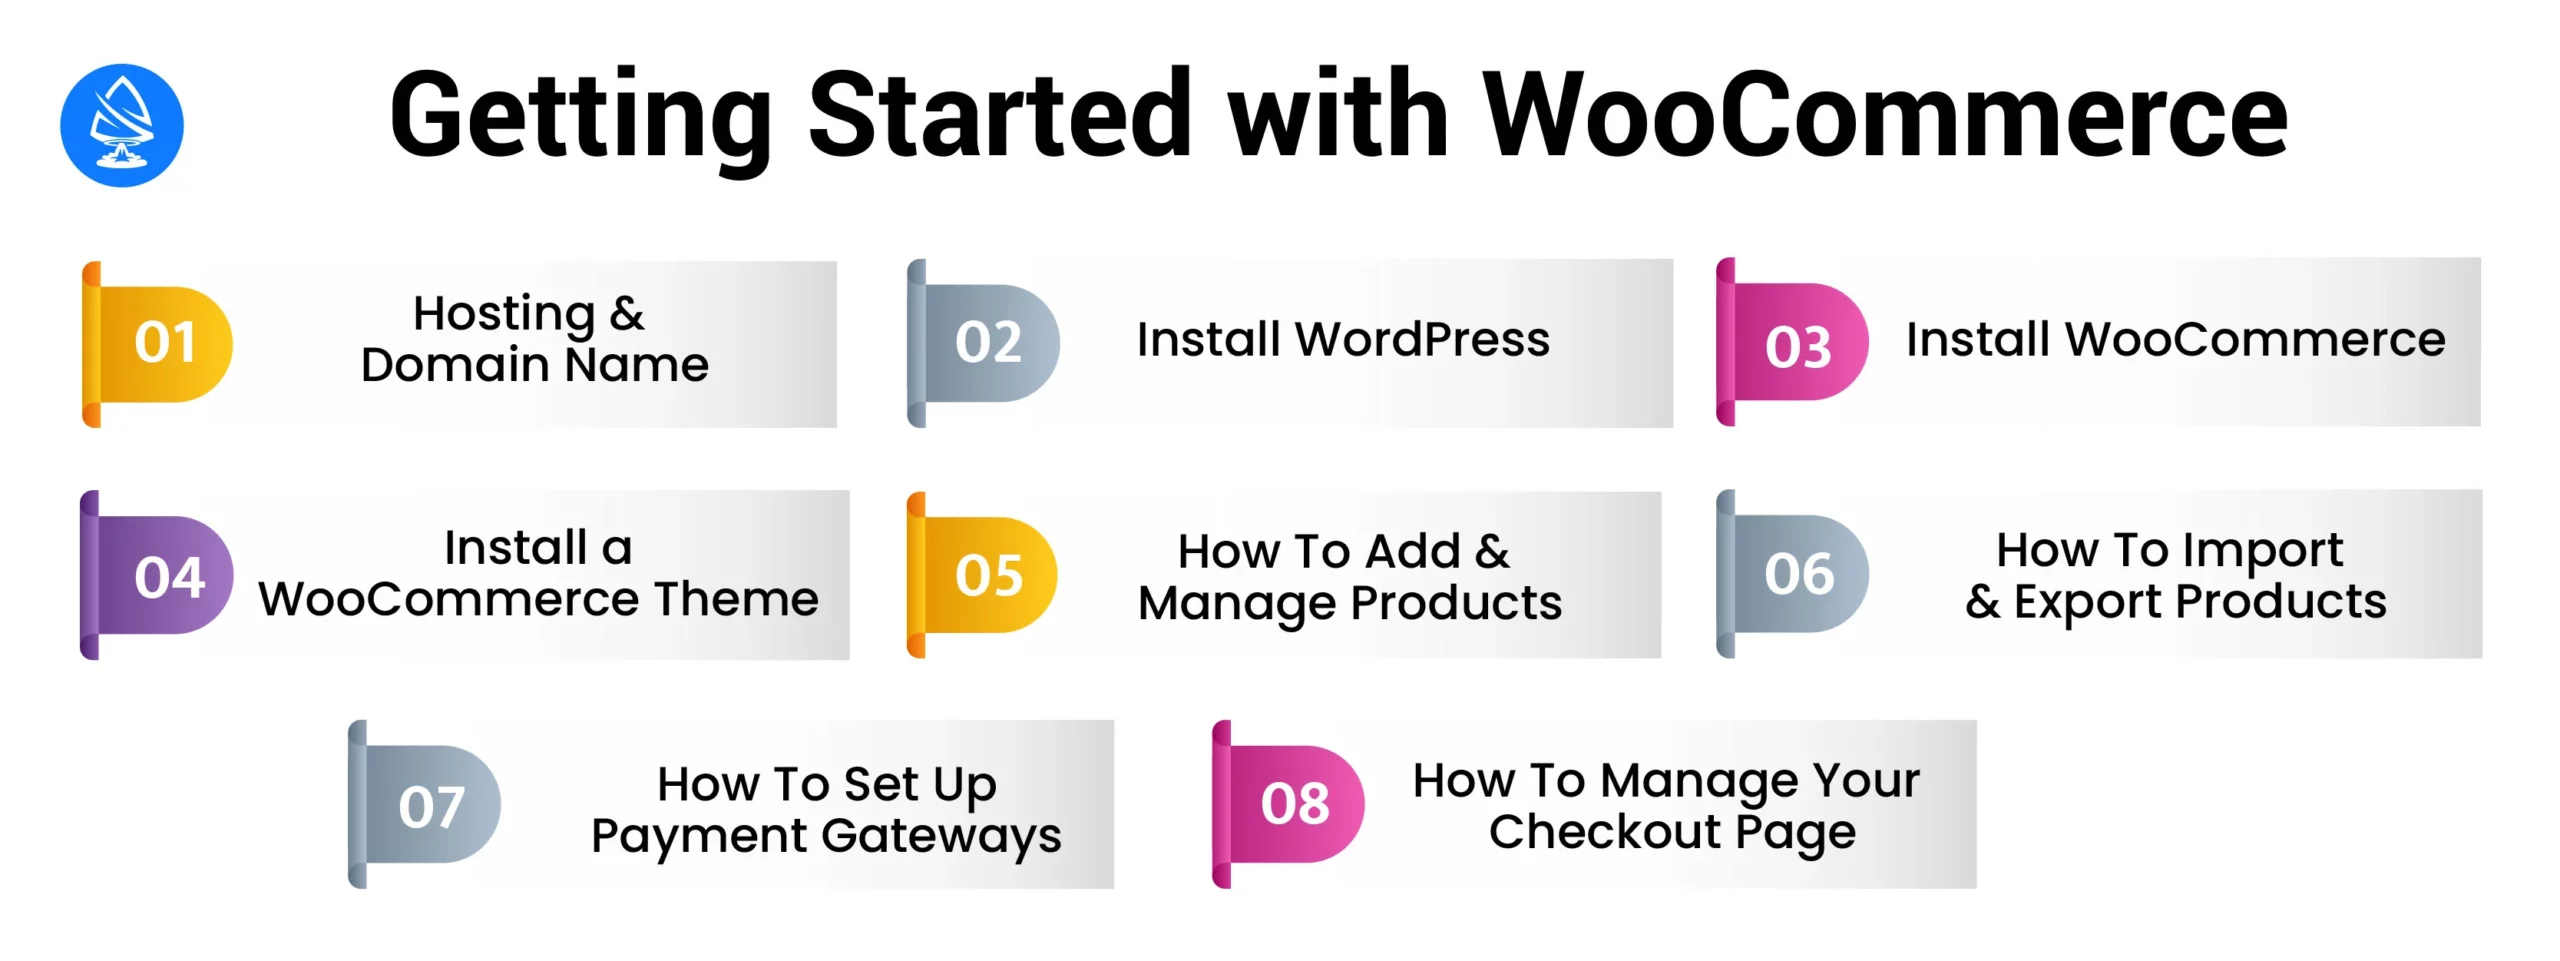 Getting Started With Woo Commerce